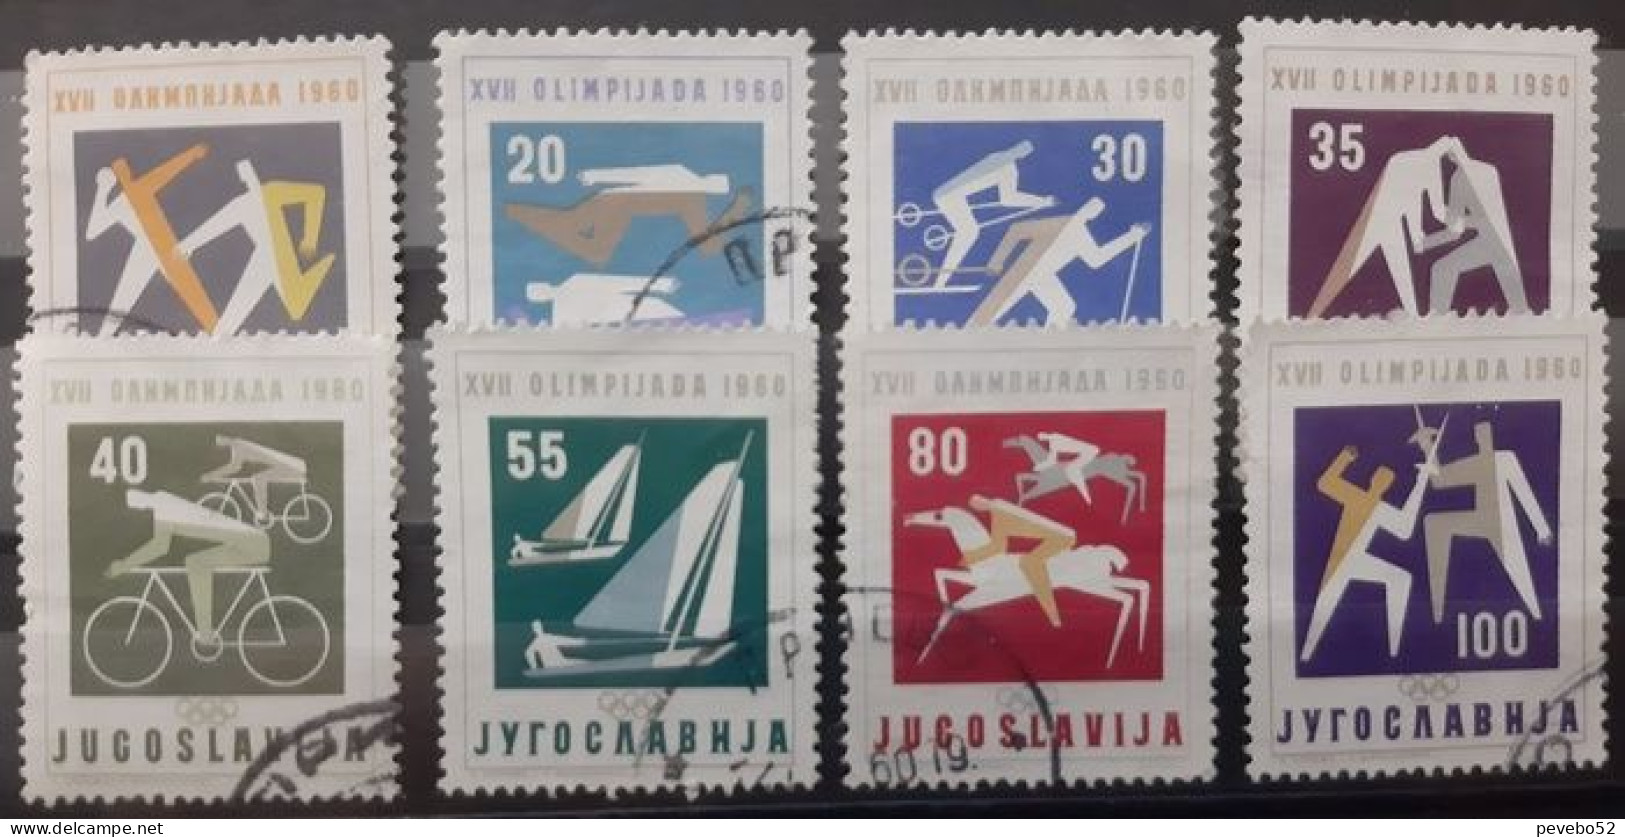 YUGOSLAVIA 1960 - Olympic Games - Rome, Italy USED - Used Stamps